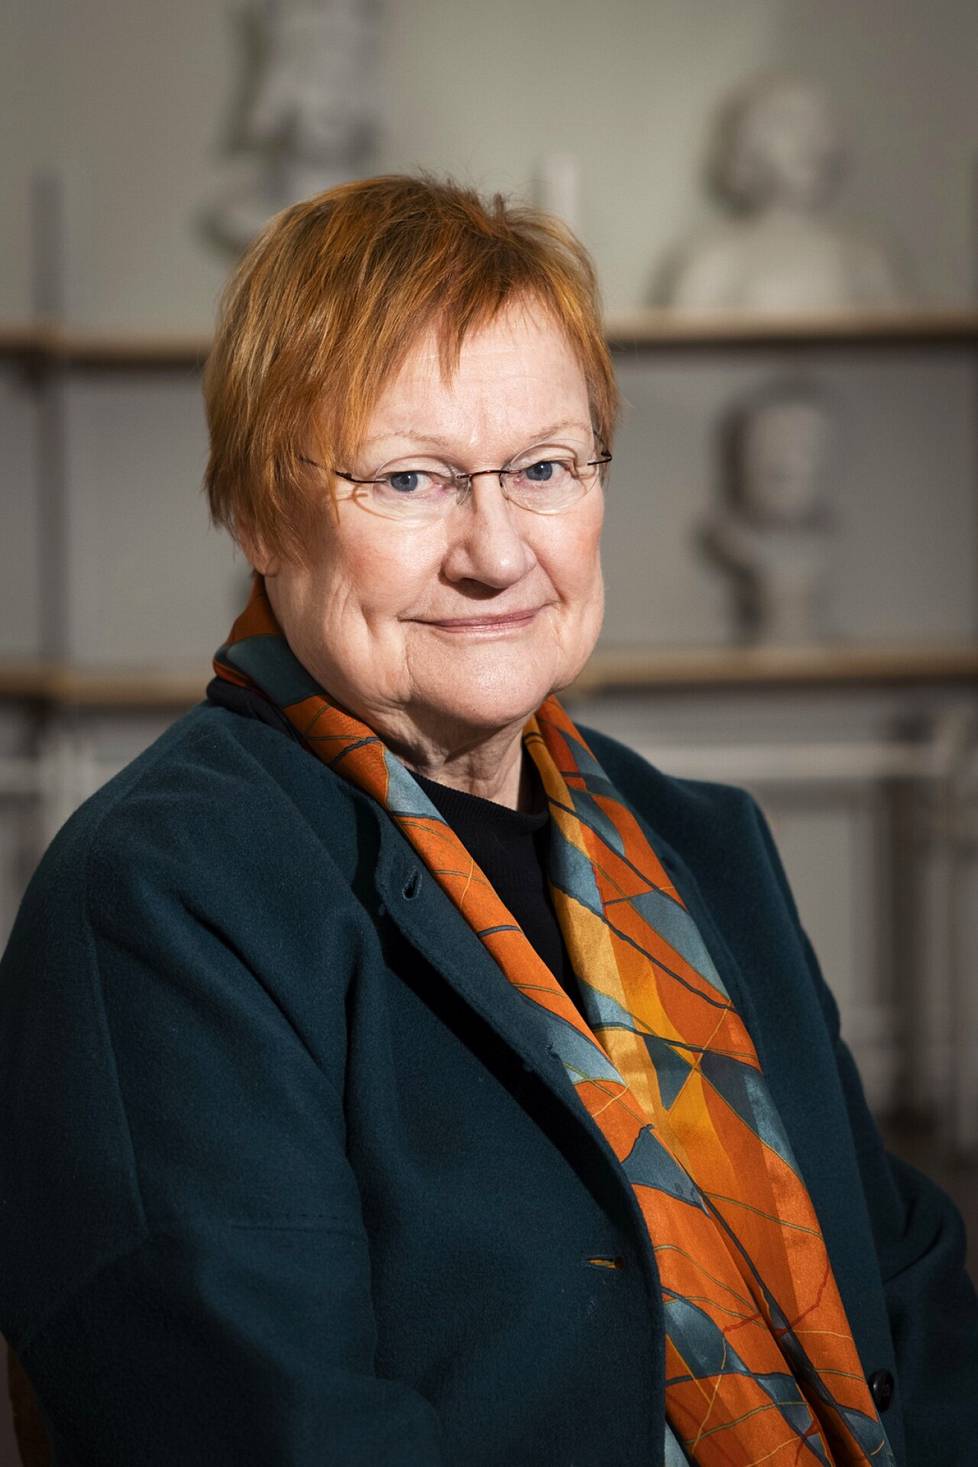 President Tarja Halonen currently spends her time, for example, as the Chairman of the Board of the National Gallery and a member of the Board of Sitra.